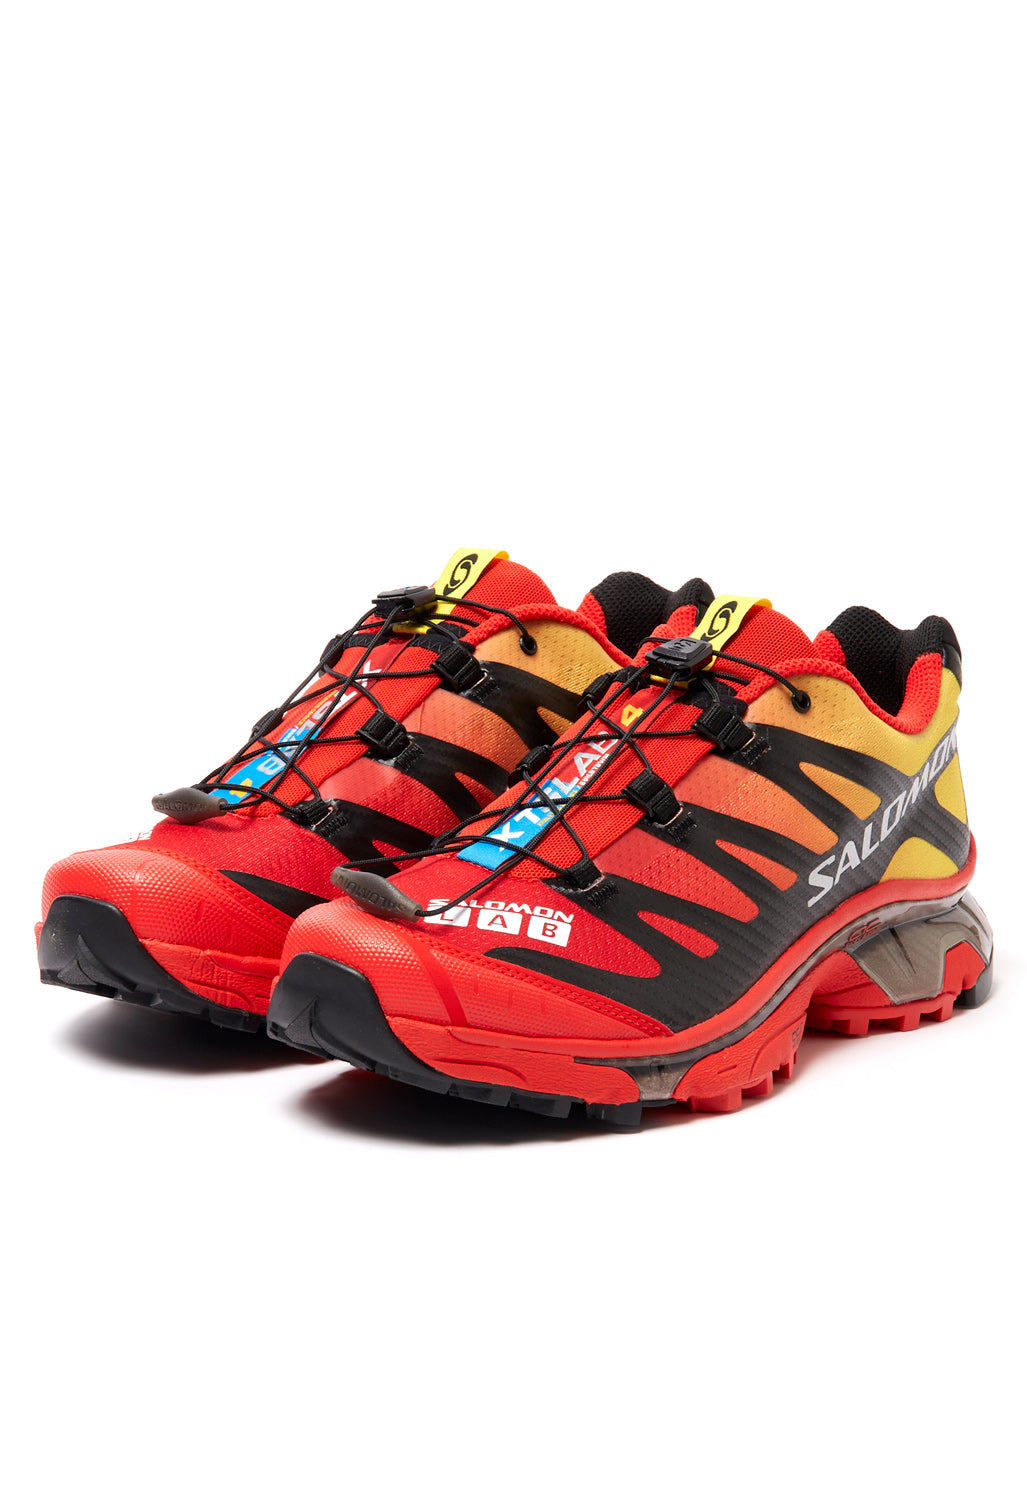 Salomon XT-4 OG Trainers - Fiery Red / Black / Empire Yellow